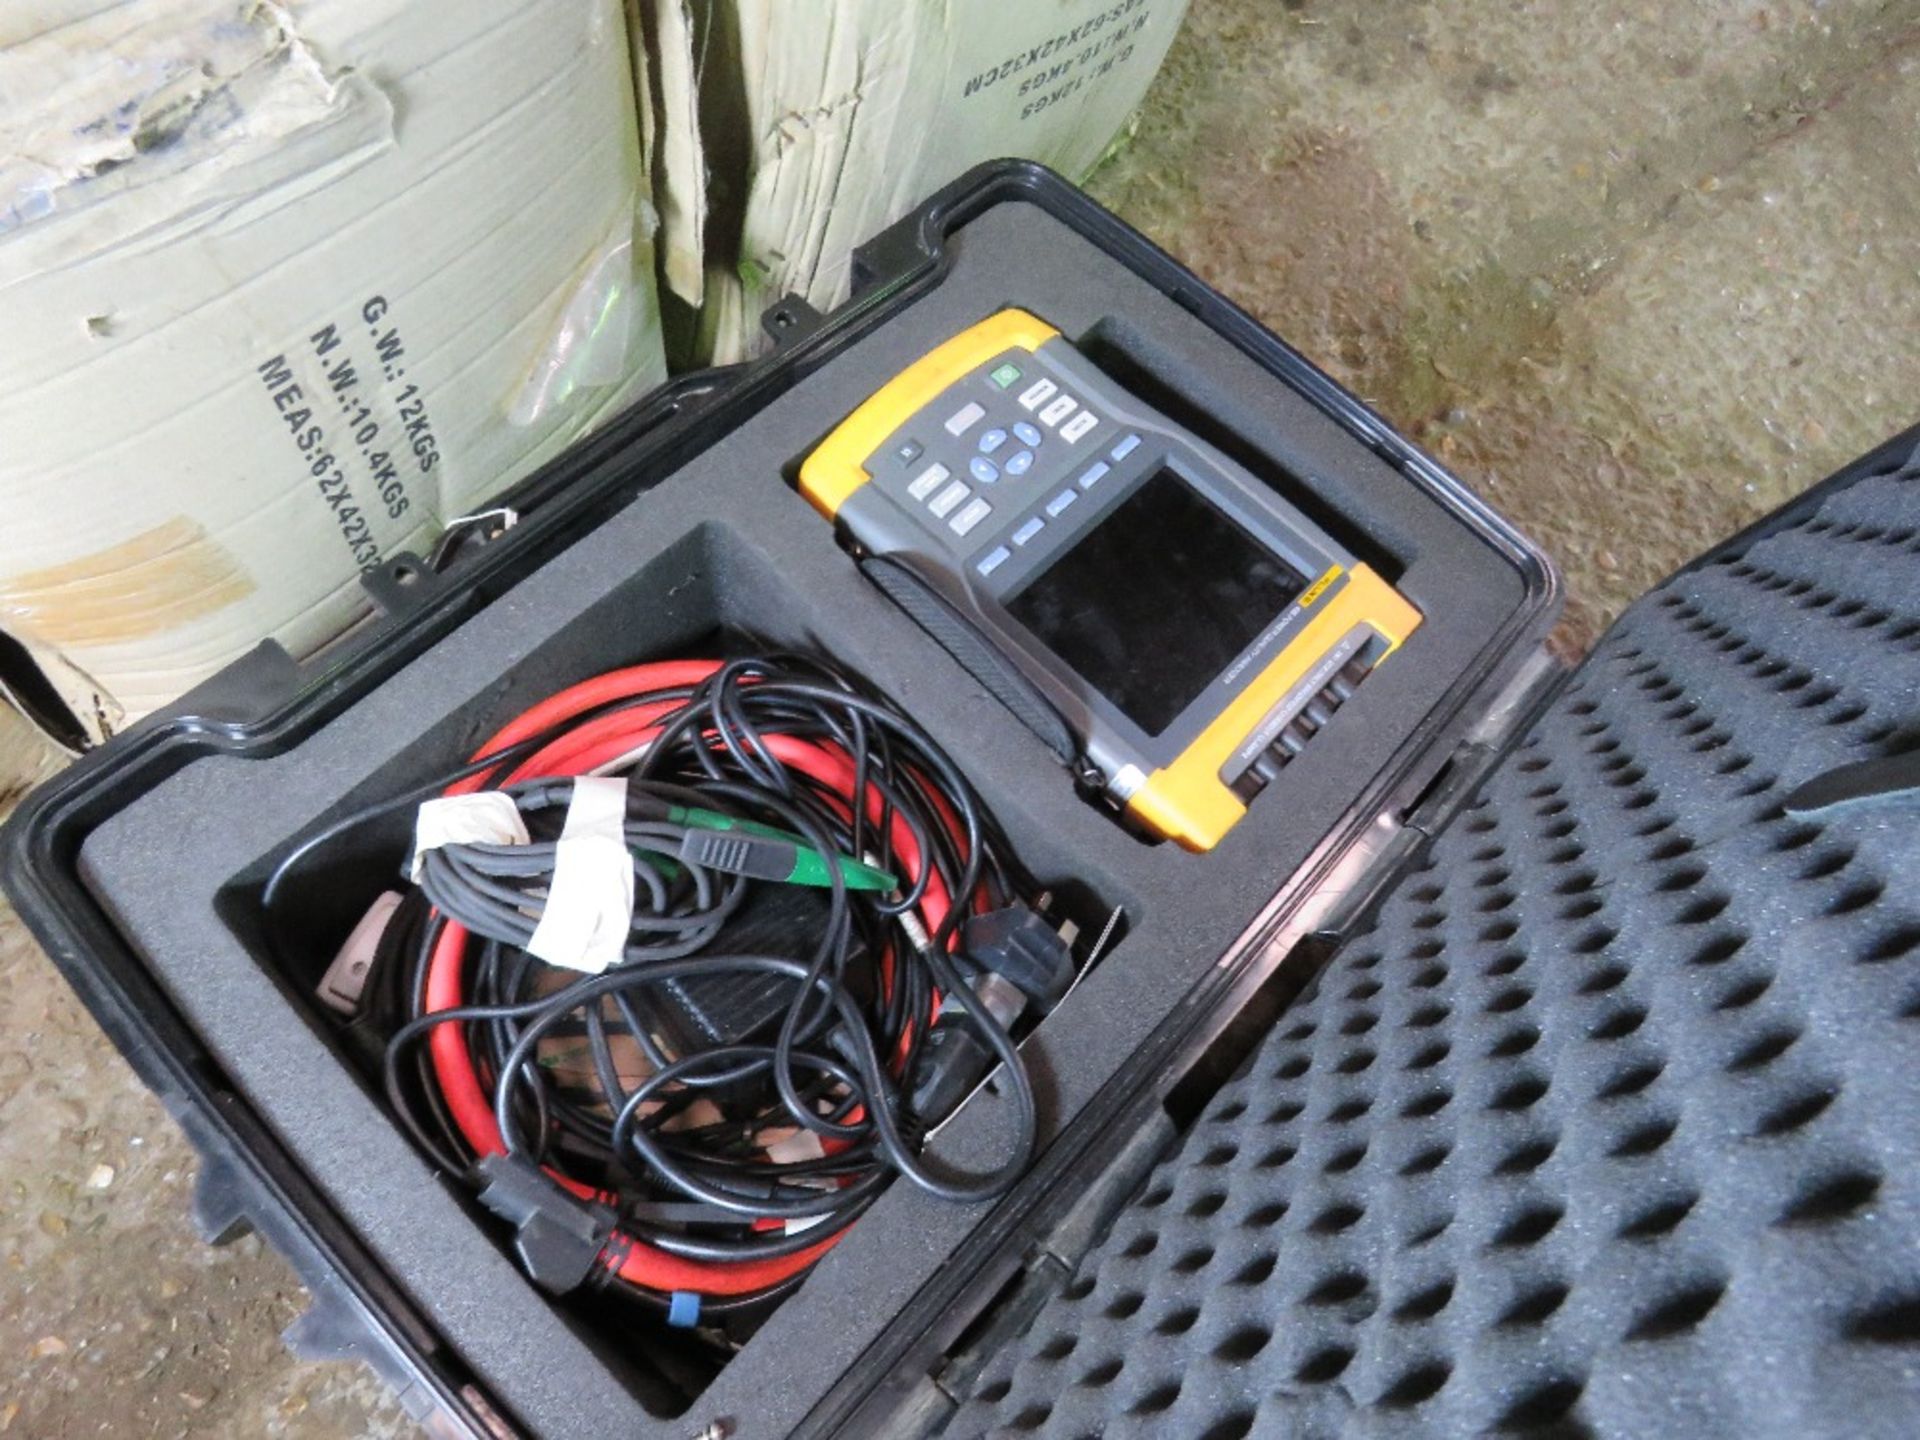 FLUKE 435 POWER QUALITY ANALYZER TEST UNIT COMPLETE WITH CABLES ETC IN CASE. SOURCED FROM DEPOT CLE